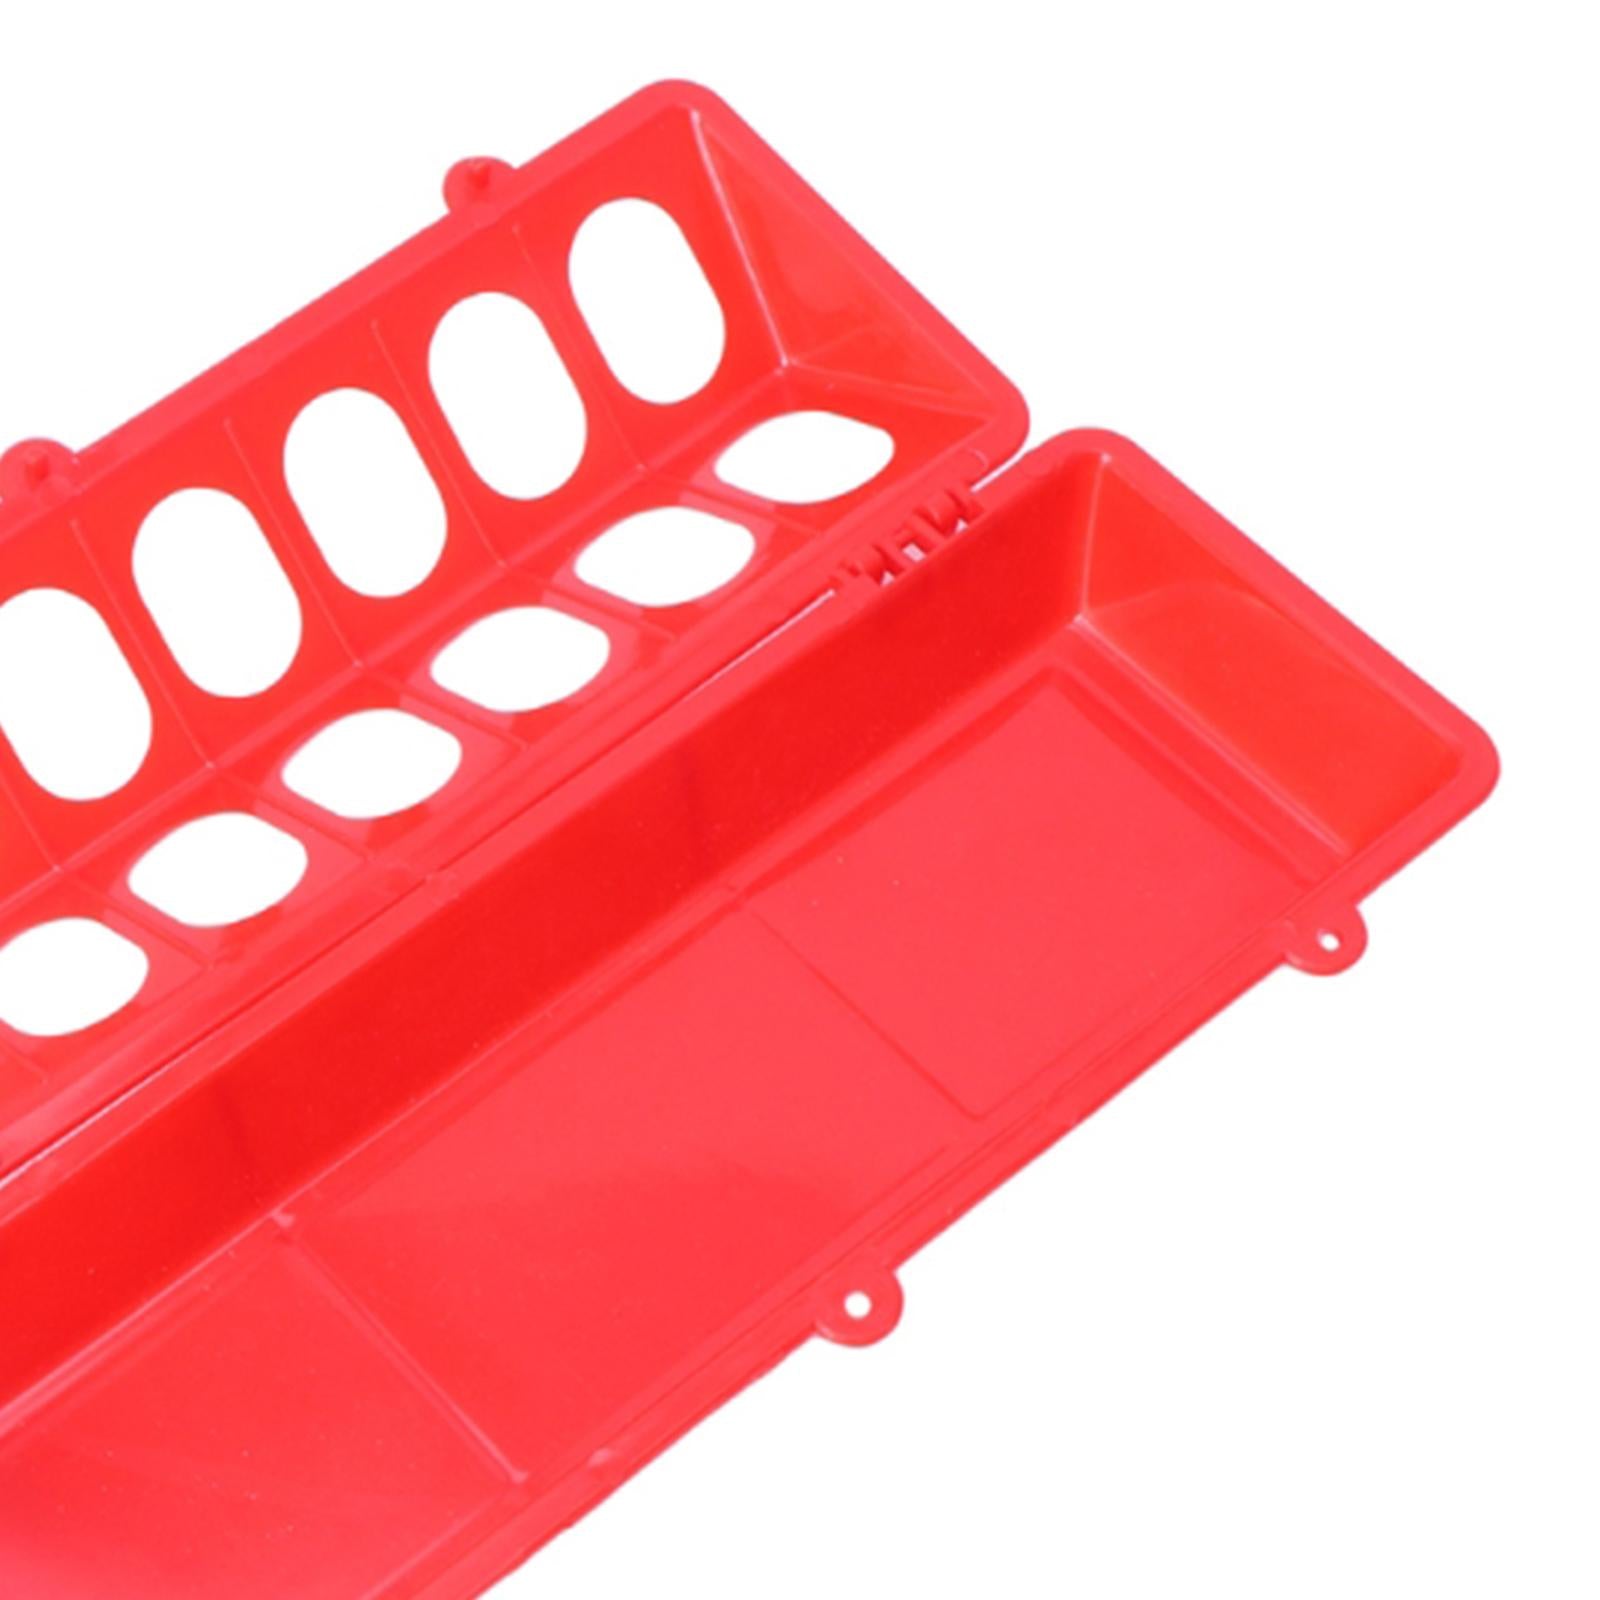 Poultry Feeder Chicken Feeding Trough Plastic Flip Top Container Red